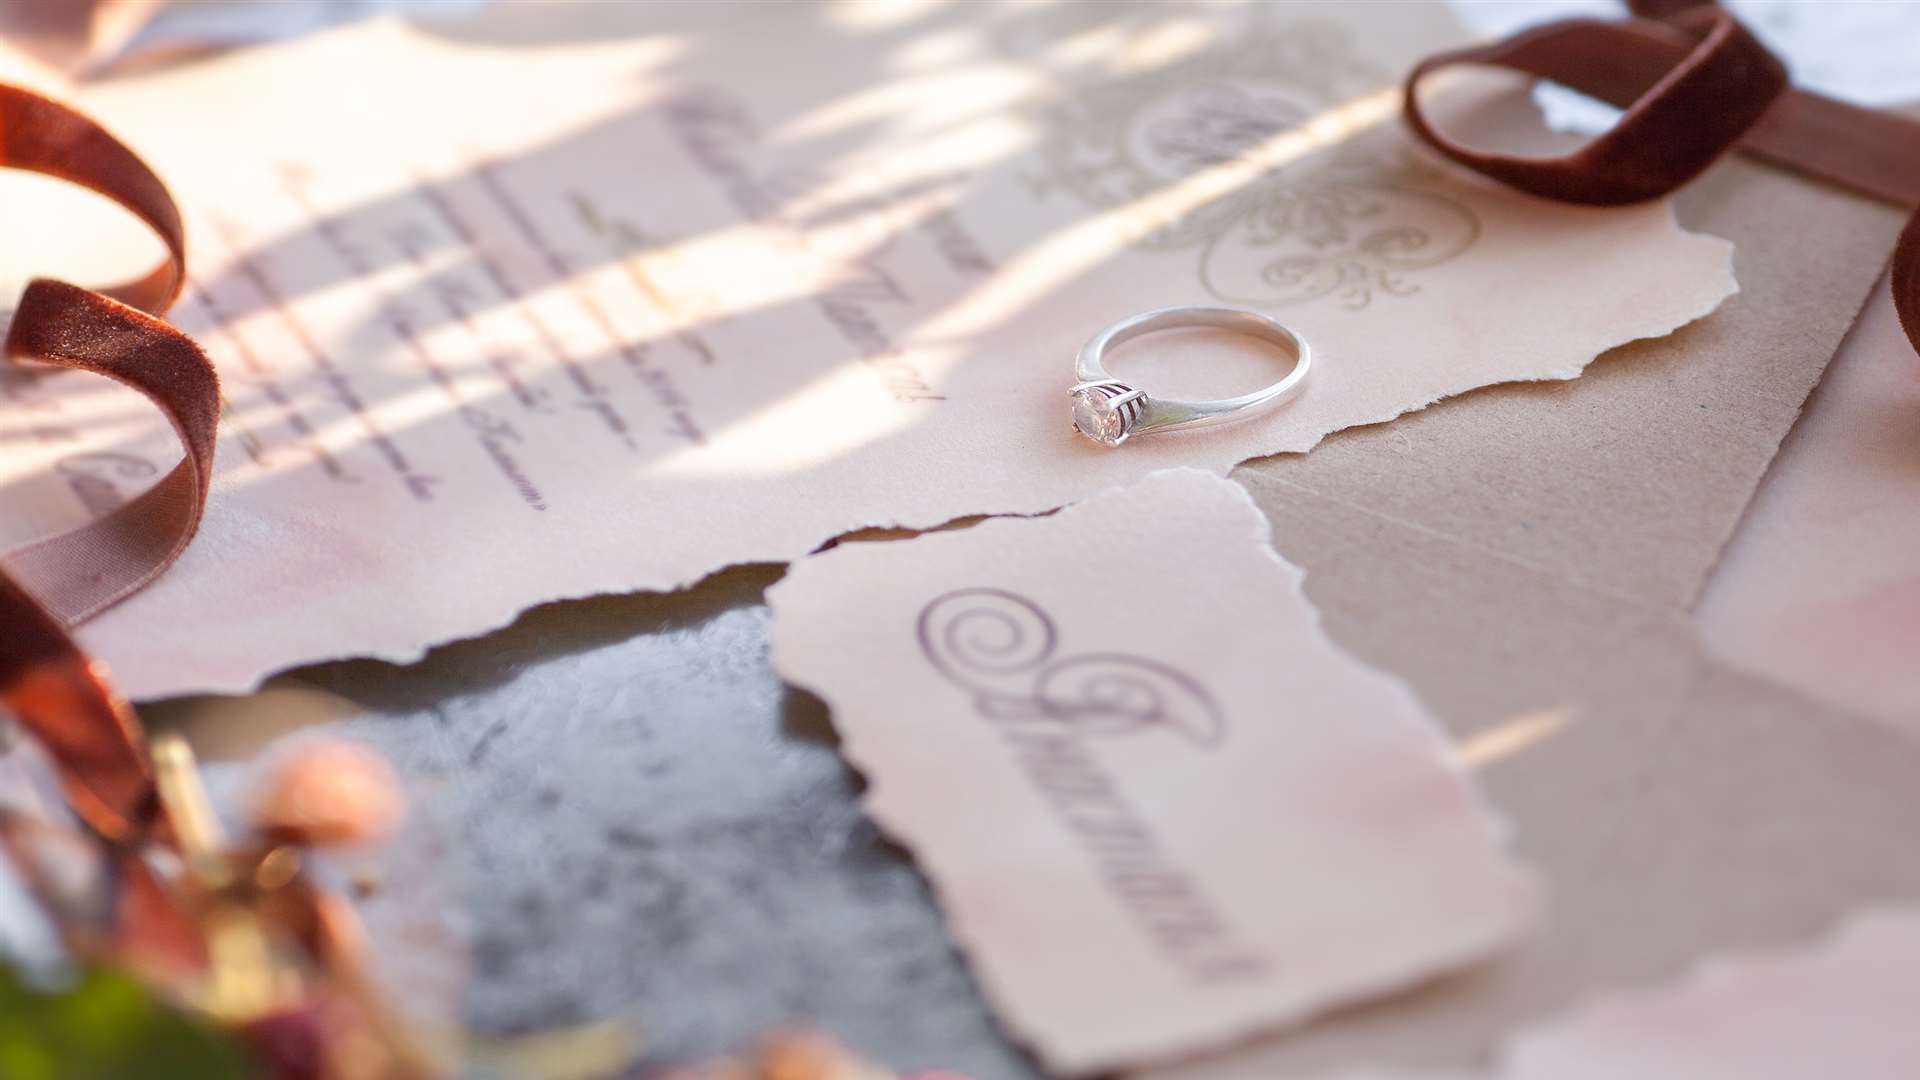 Wedding stationary is often more than just the initial invitation